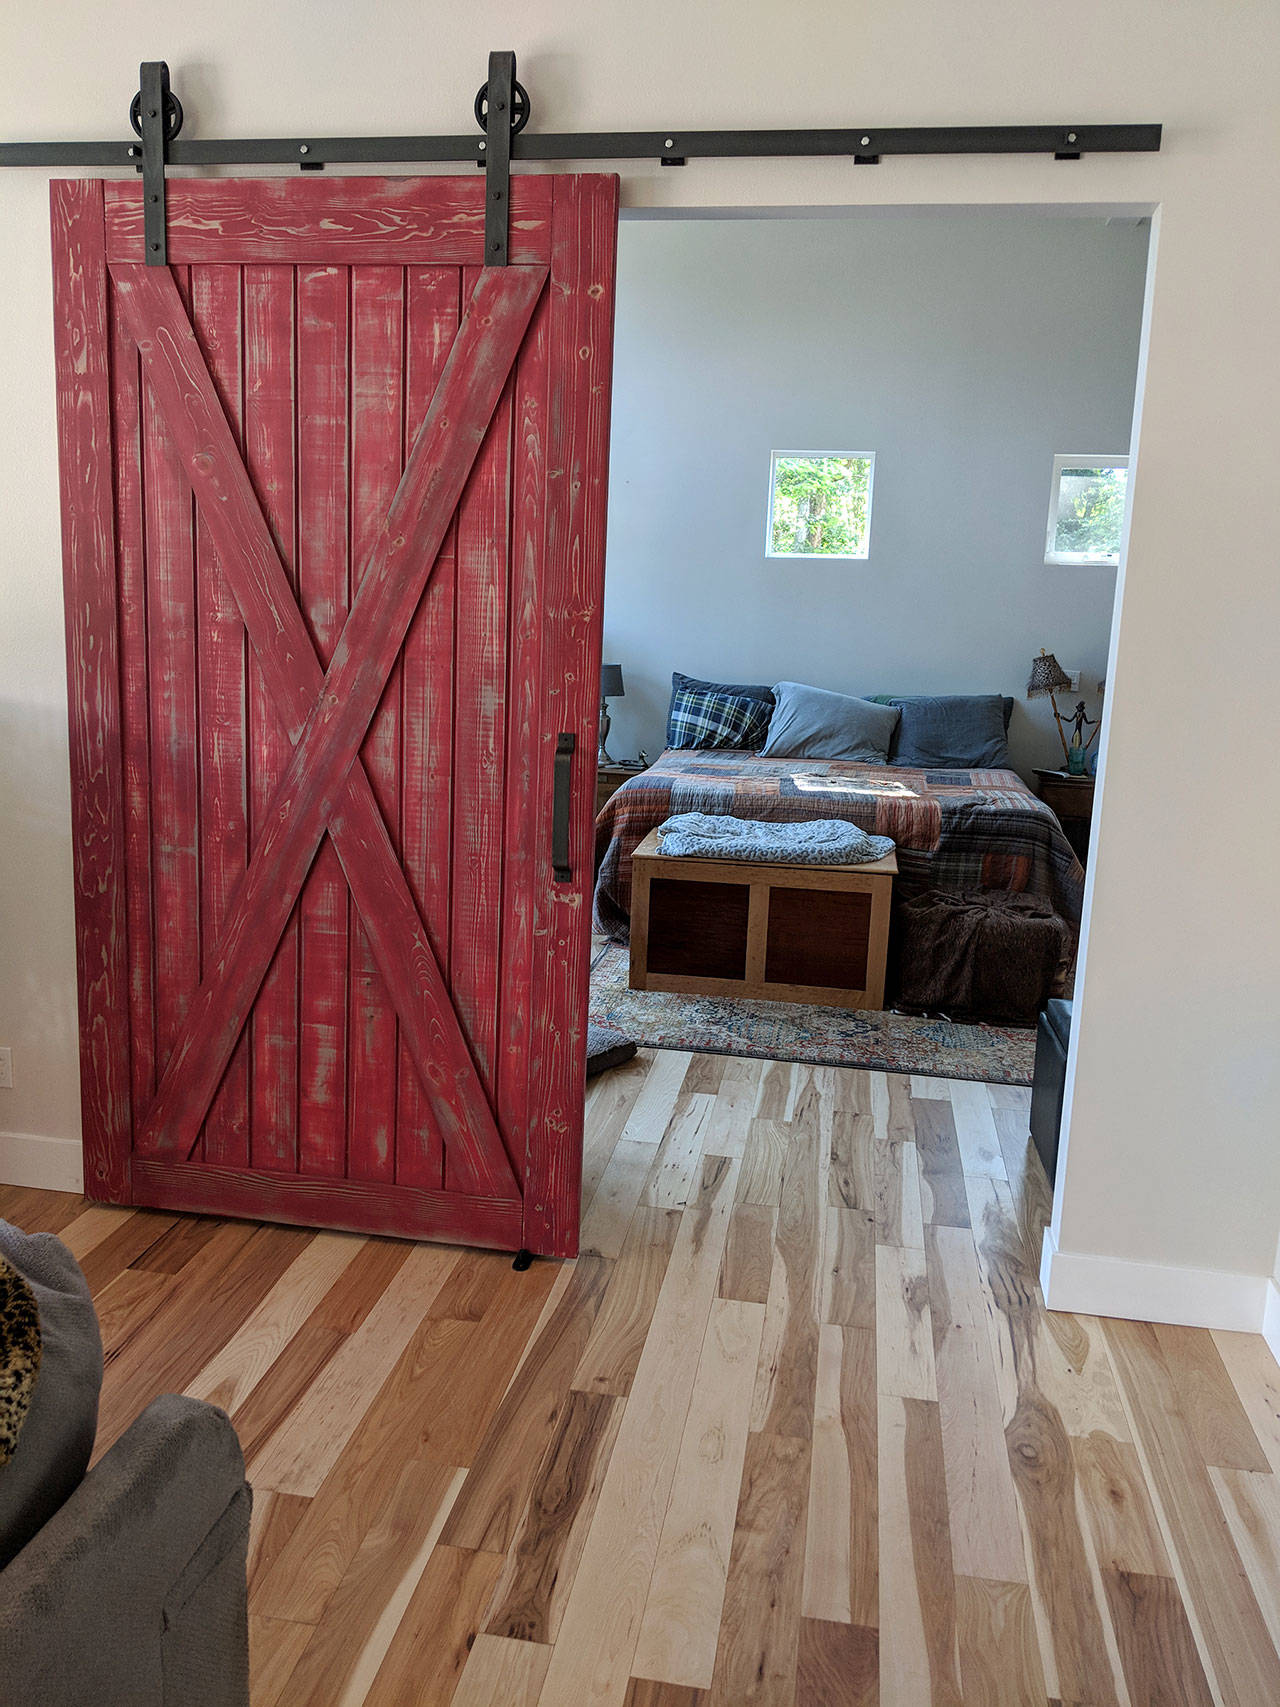 Mike Hayes, owner of Born In A Barn in Everett, makes handcrafted barn doors that can be used anywhere around the house. Born In A Barn will be one of more than 20 exhibitors from Snohomish County attending Seattle Home Show 2 coming Oct. 19-21 at CenturyLink Field Event Center. (Mike Hayes)